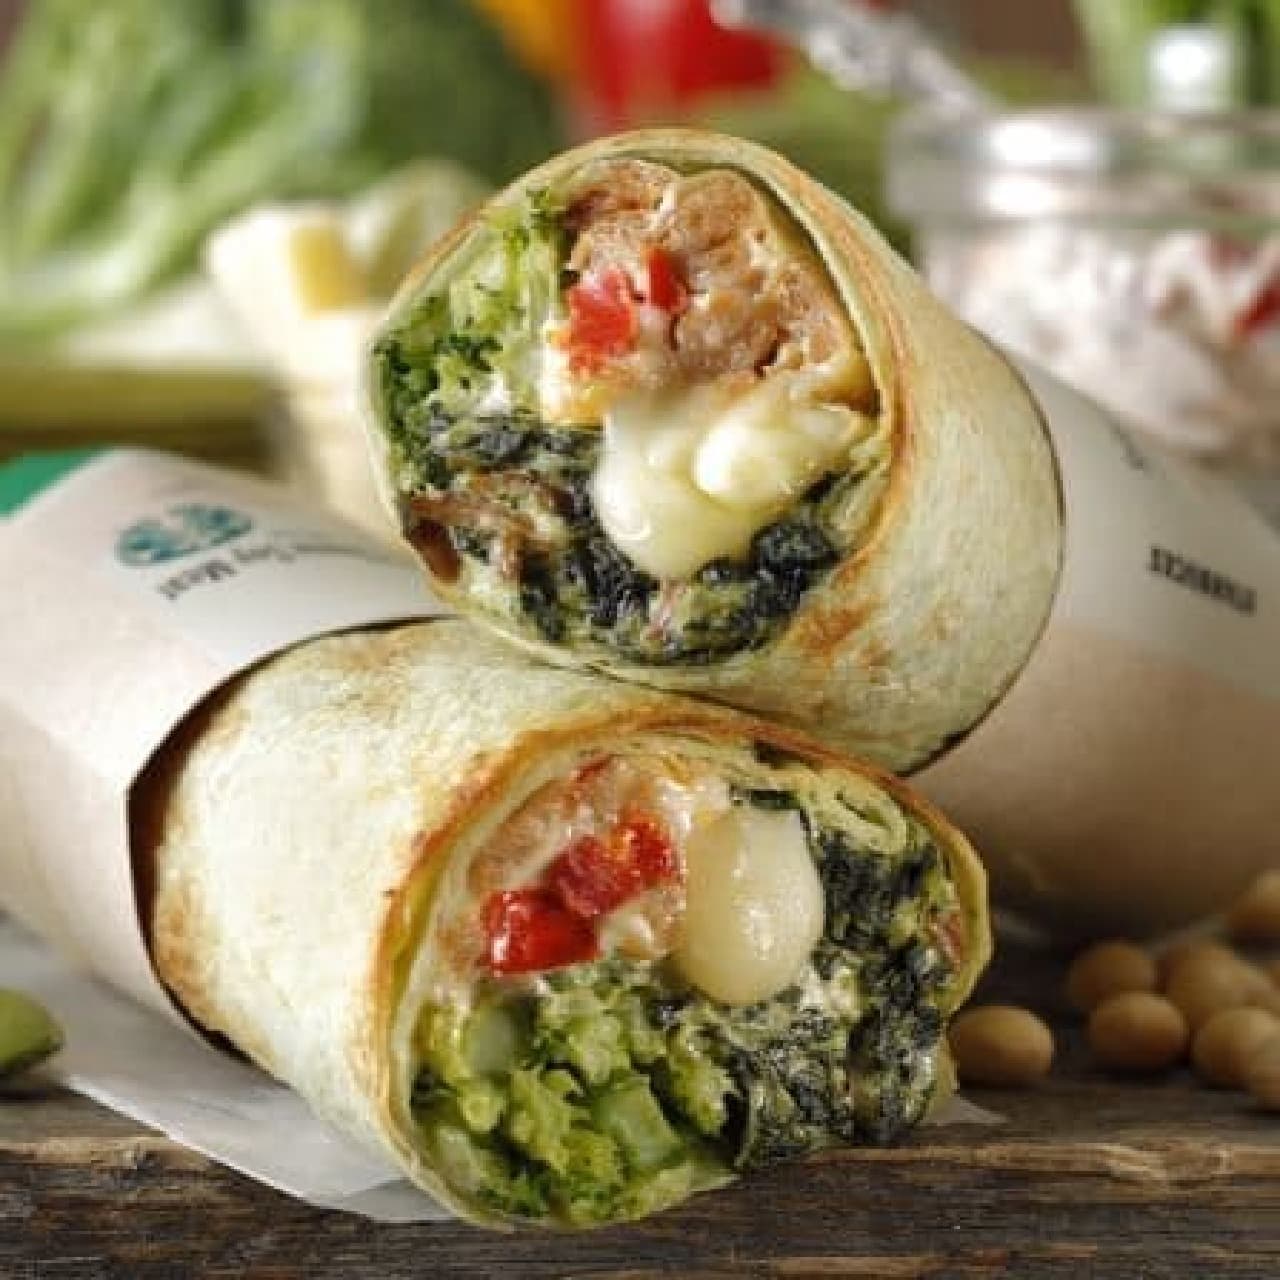 Starbucks "Hot Salad Wrap Spinach & Cheese Soy Meat"